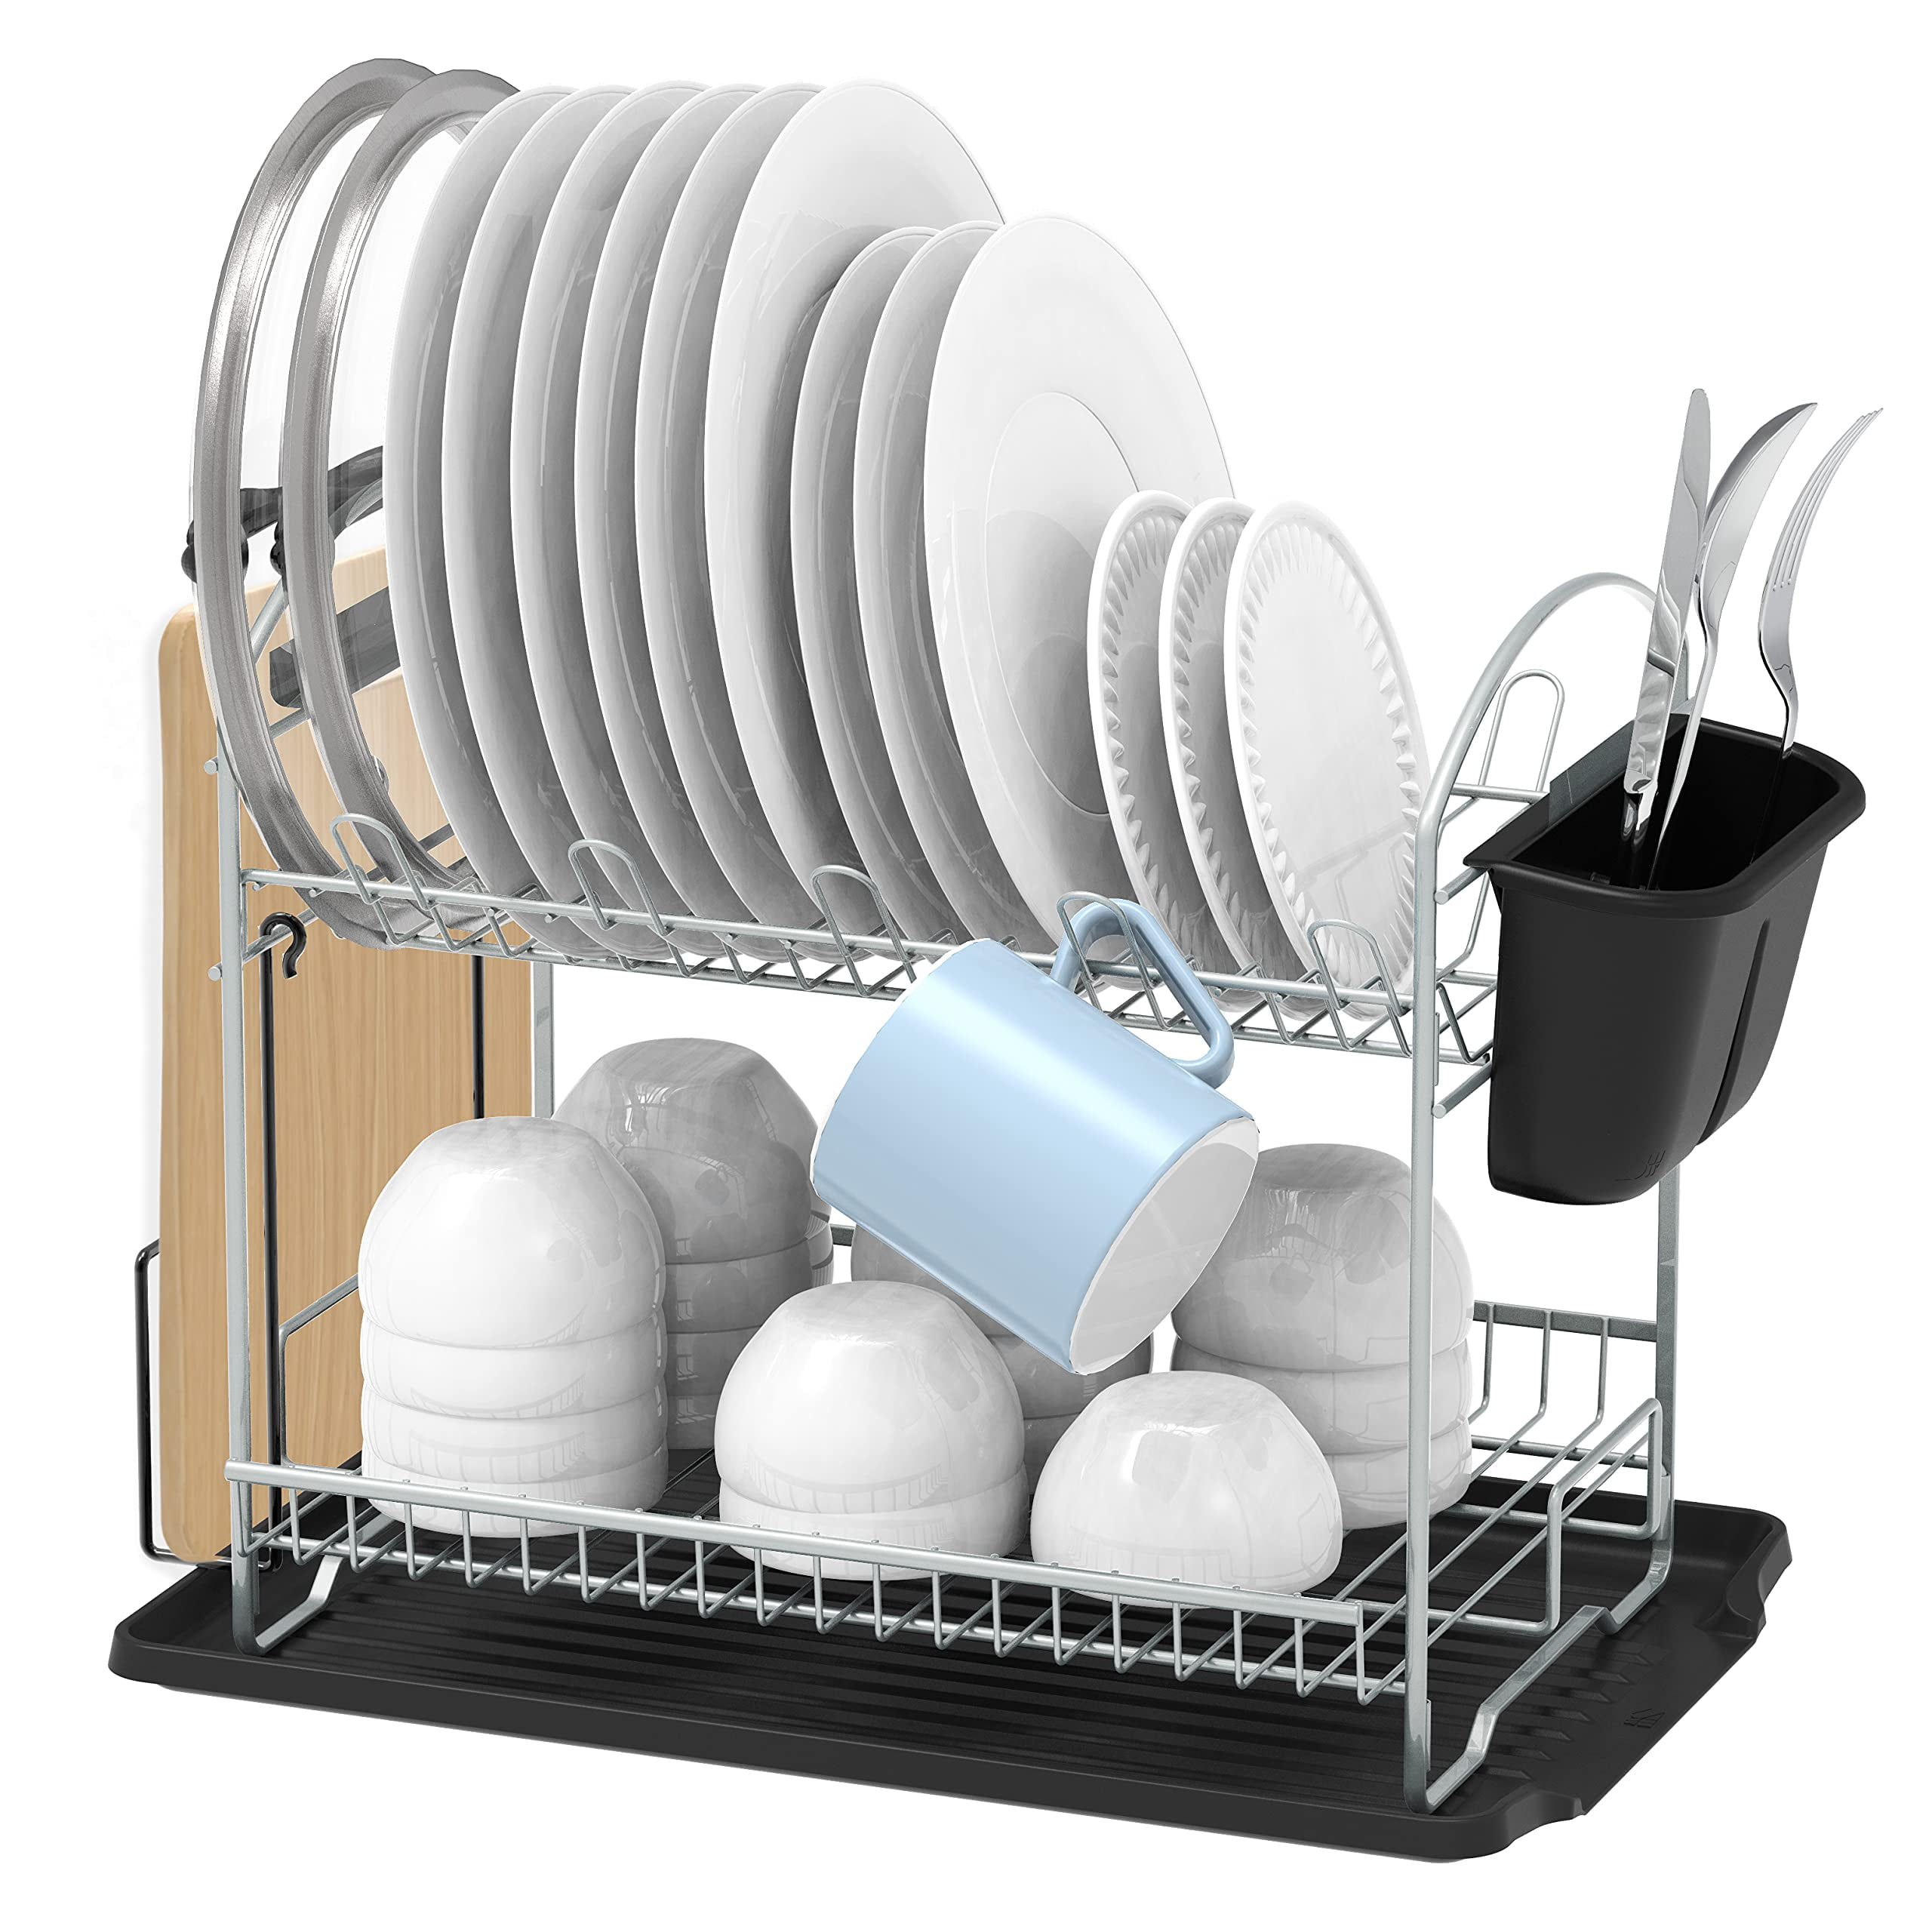 Simple Houseware 2-Tier Metal Dish Rack with Drainboard, Chrome for Kitchen